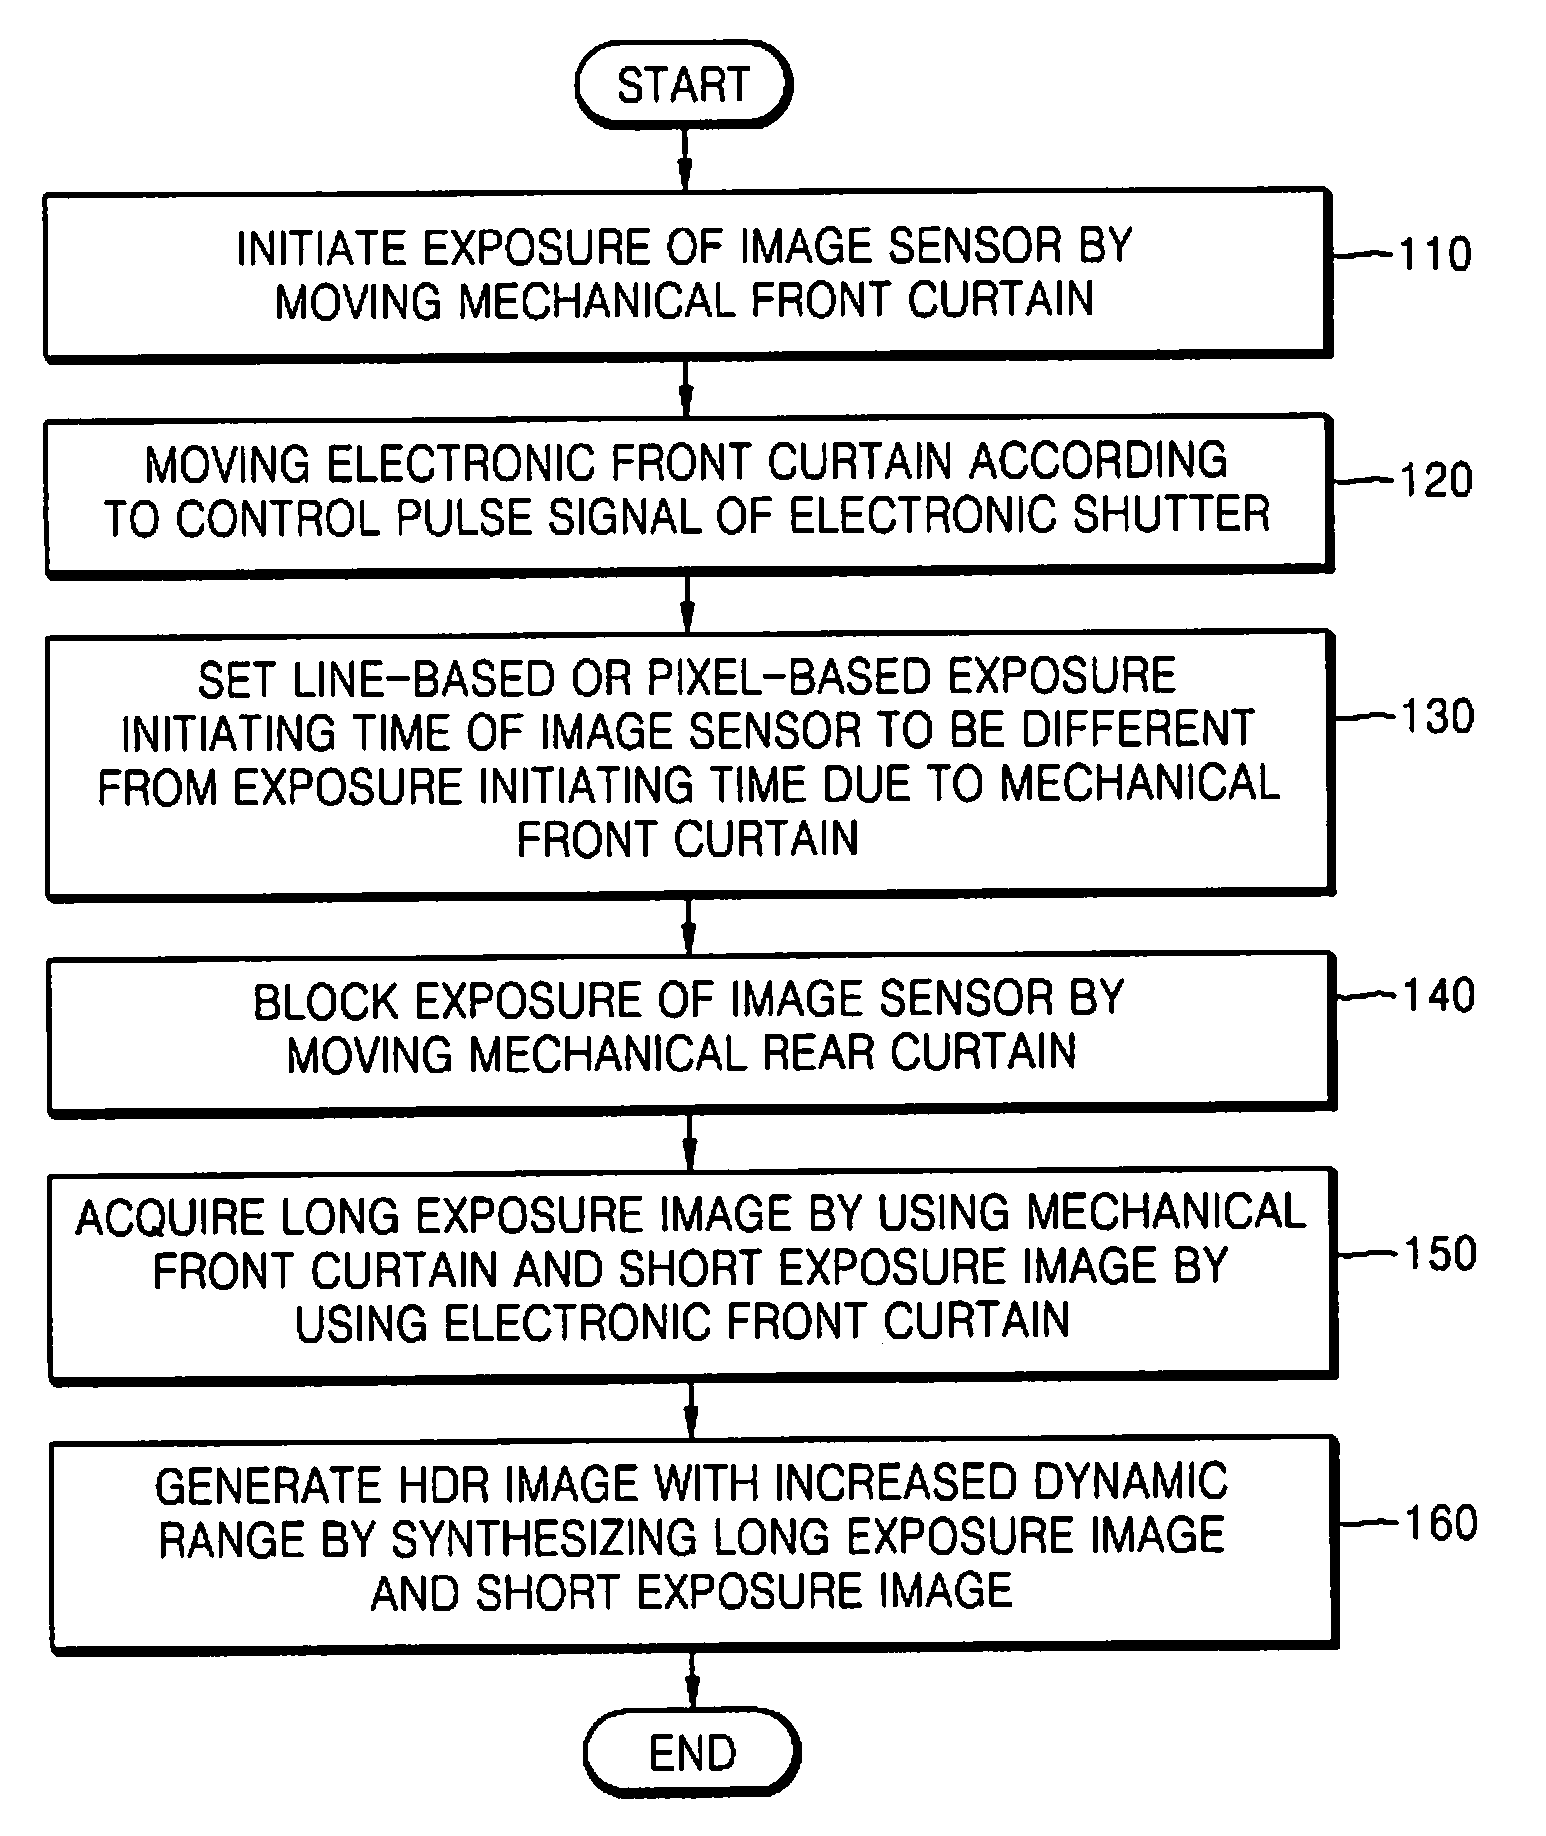 Method and apparatus for increasing dynamic range of image by using electronic shutter